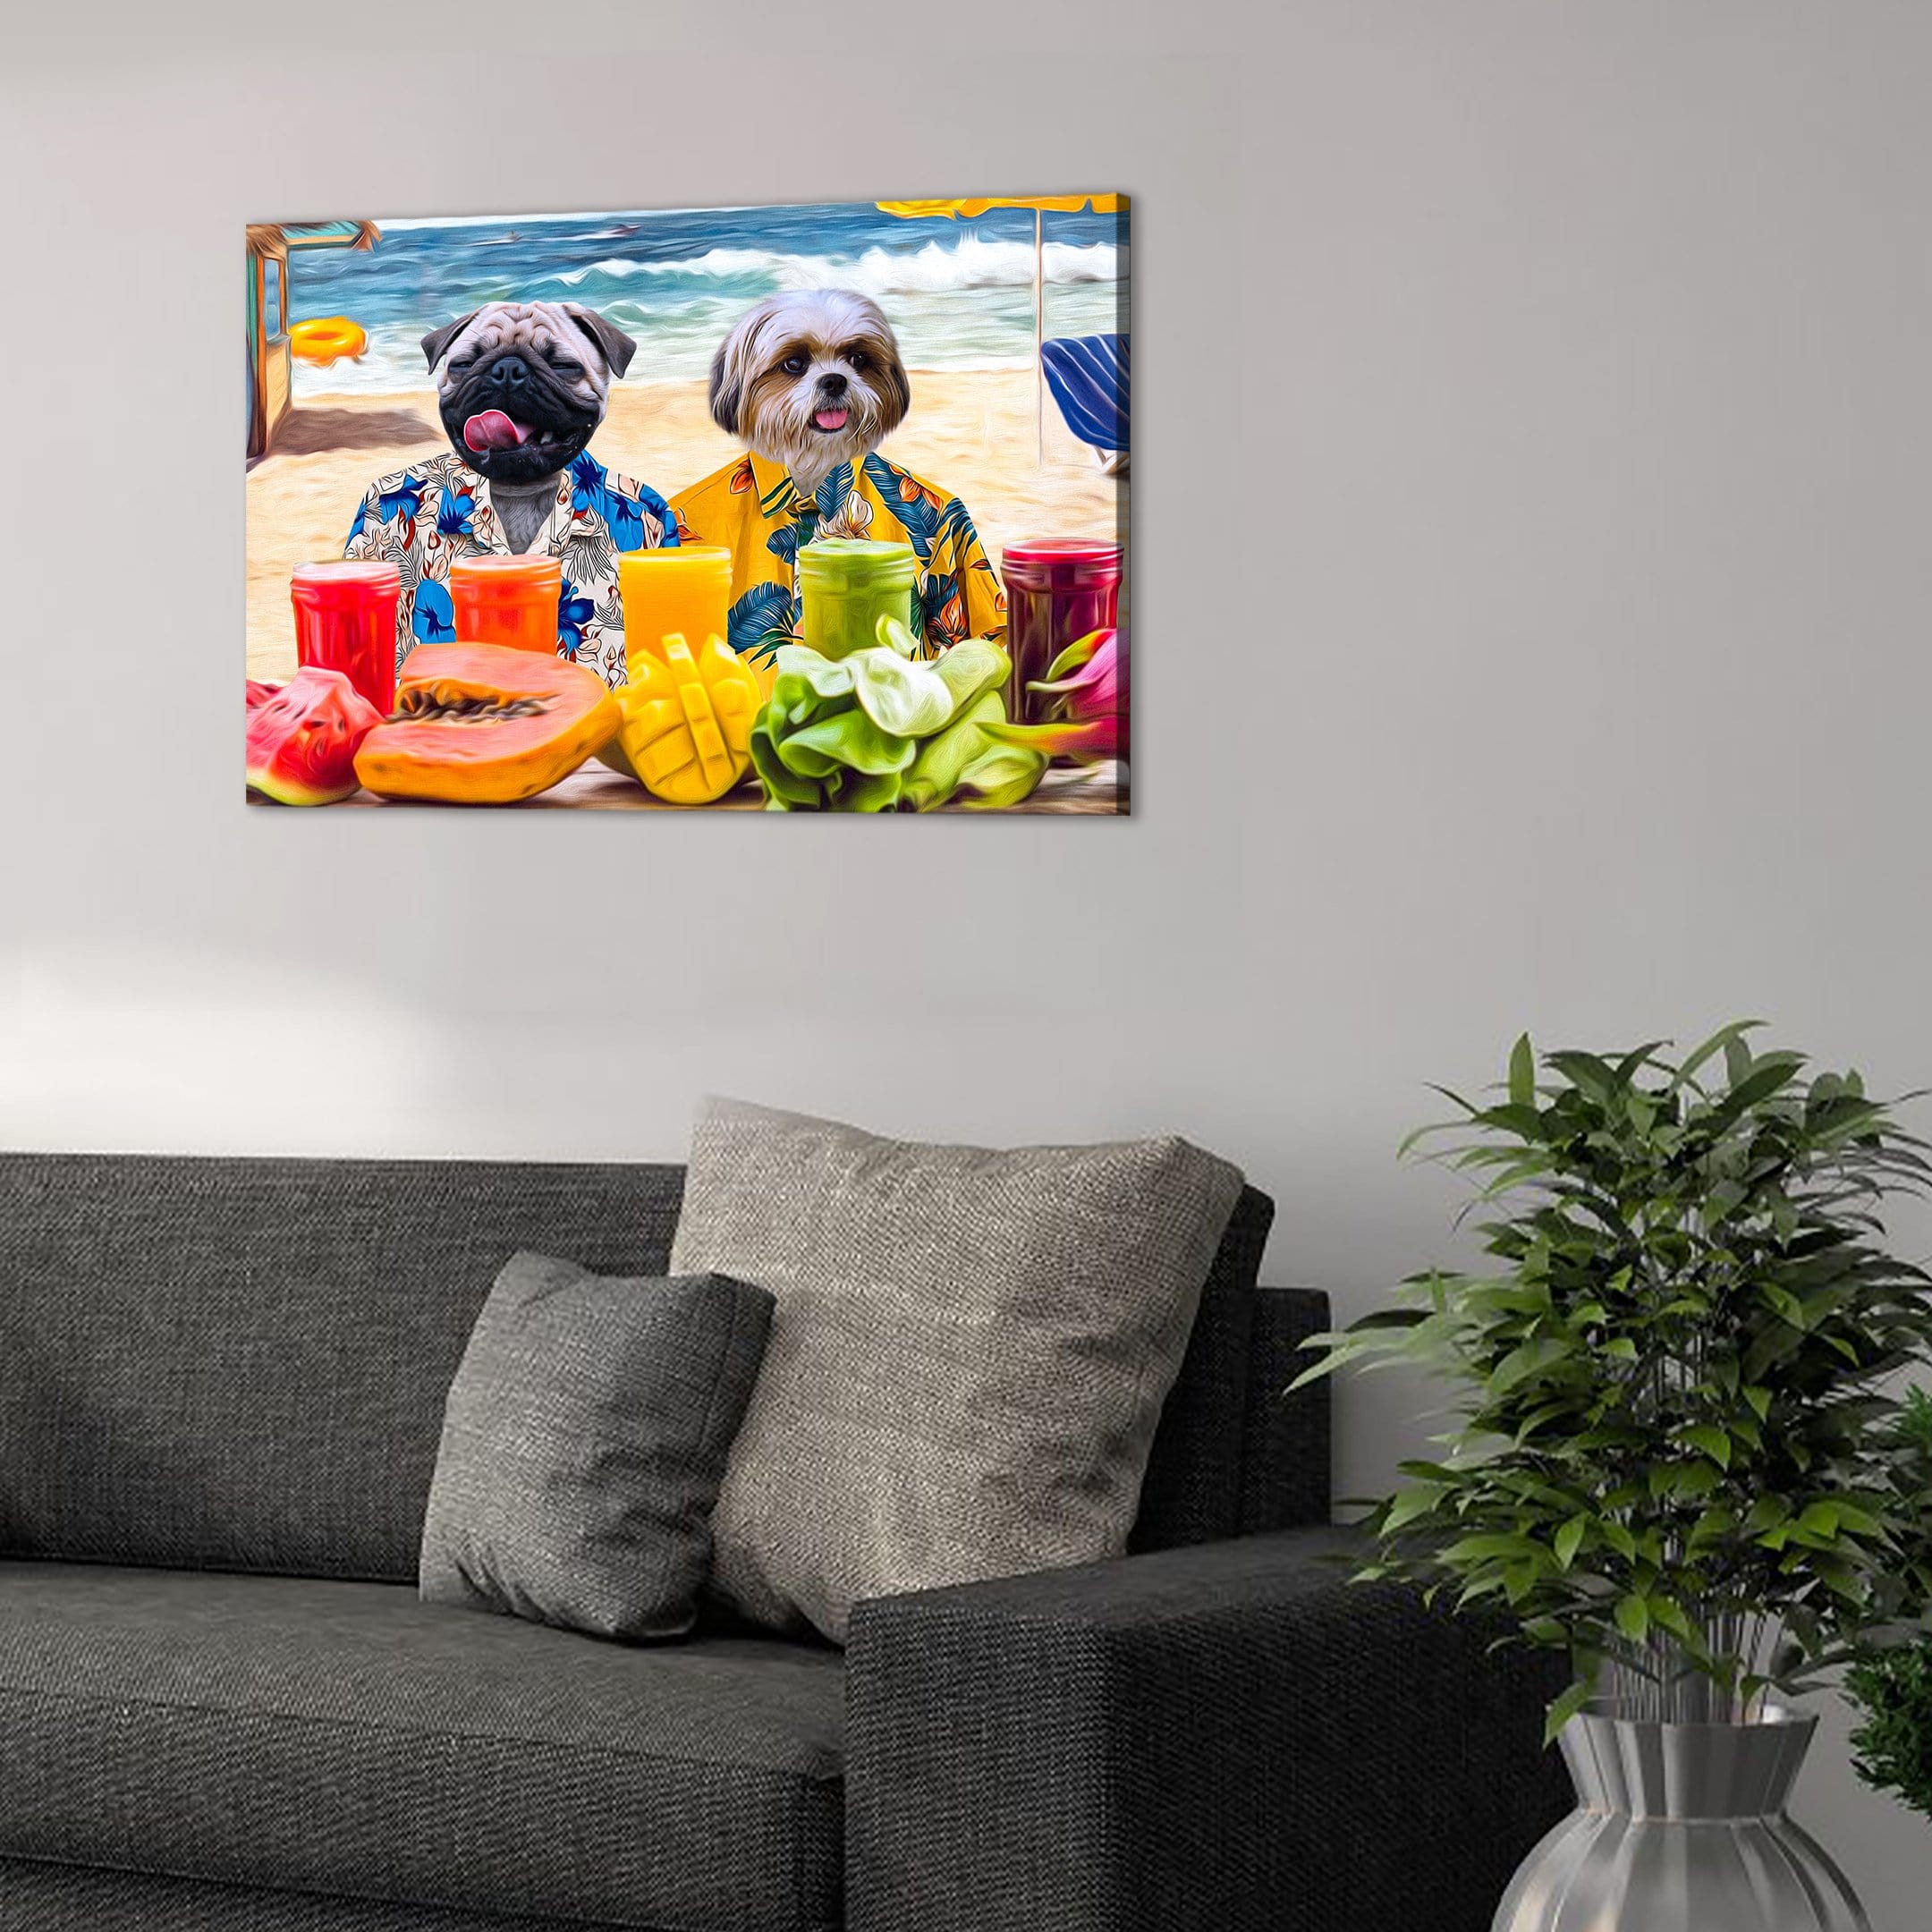 &#39;The Beach Dogs&#39; Personalized 2 Pet Canvas